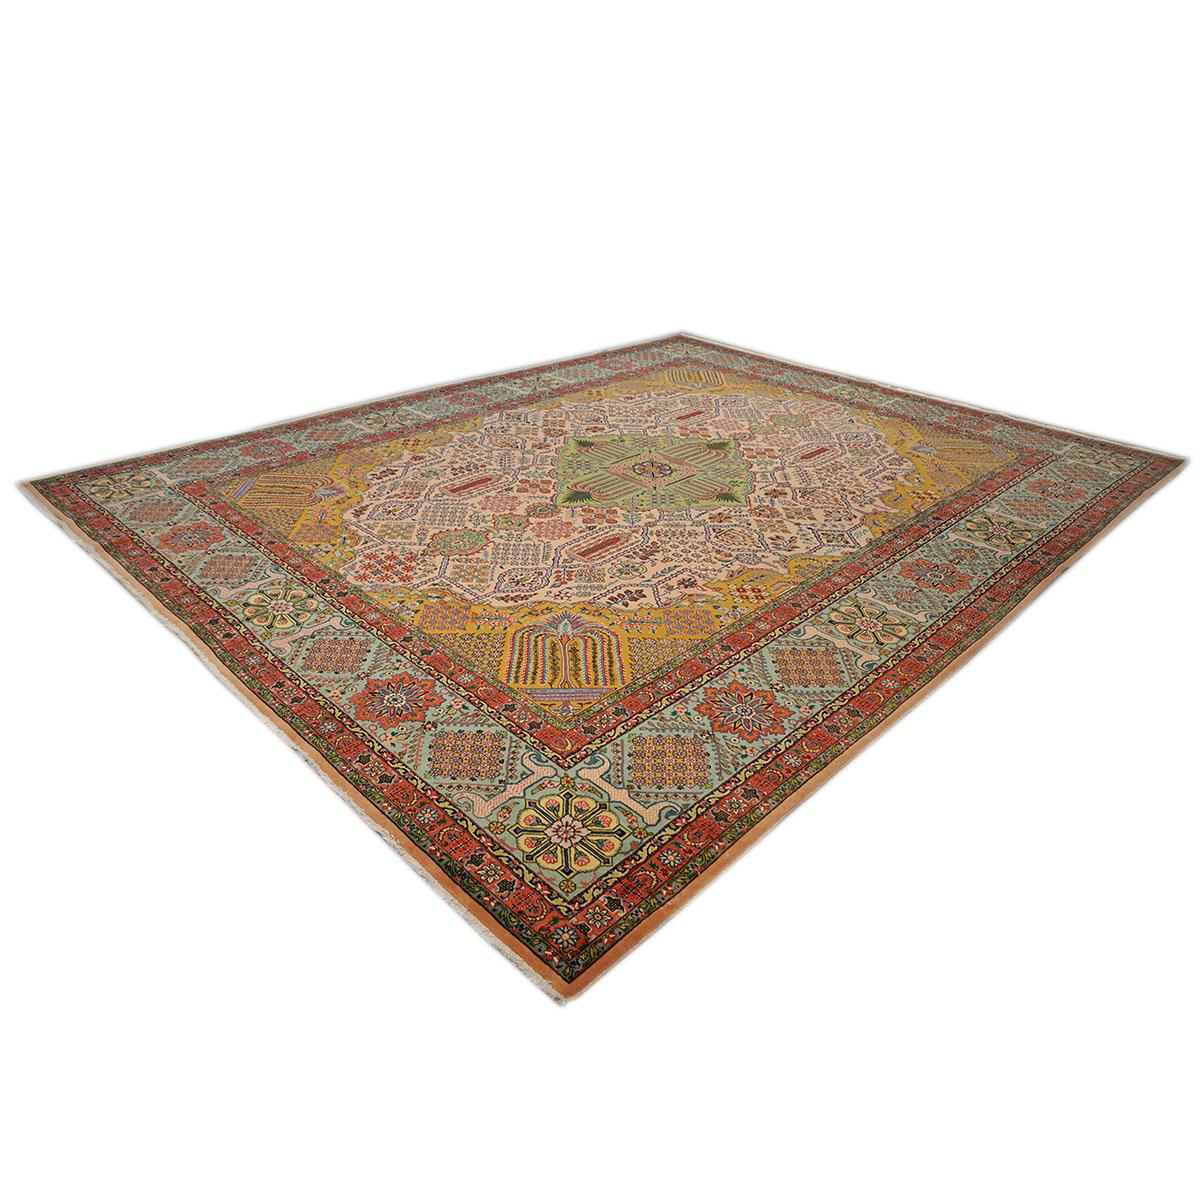 Antique 1930s Persian Tabriz Pahlavi 10x13 Light Pink, Blue & Peach Handmade Rug In Good Condition For Sale In Houston, TX